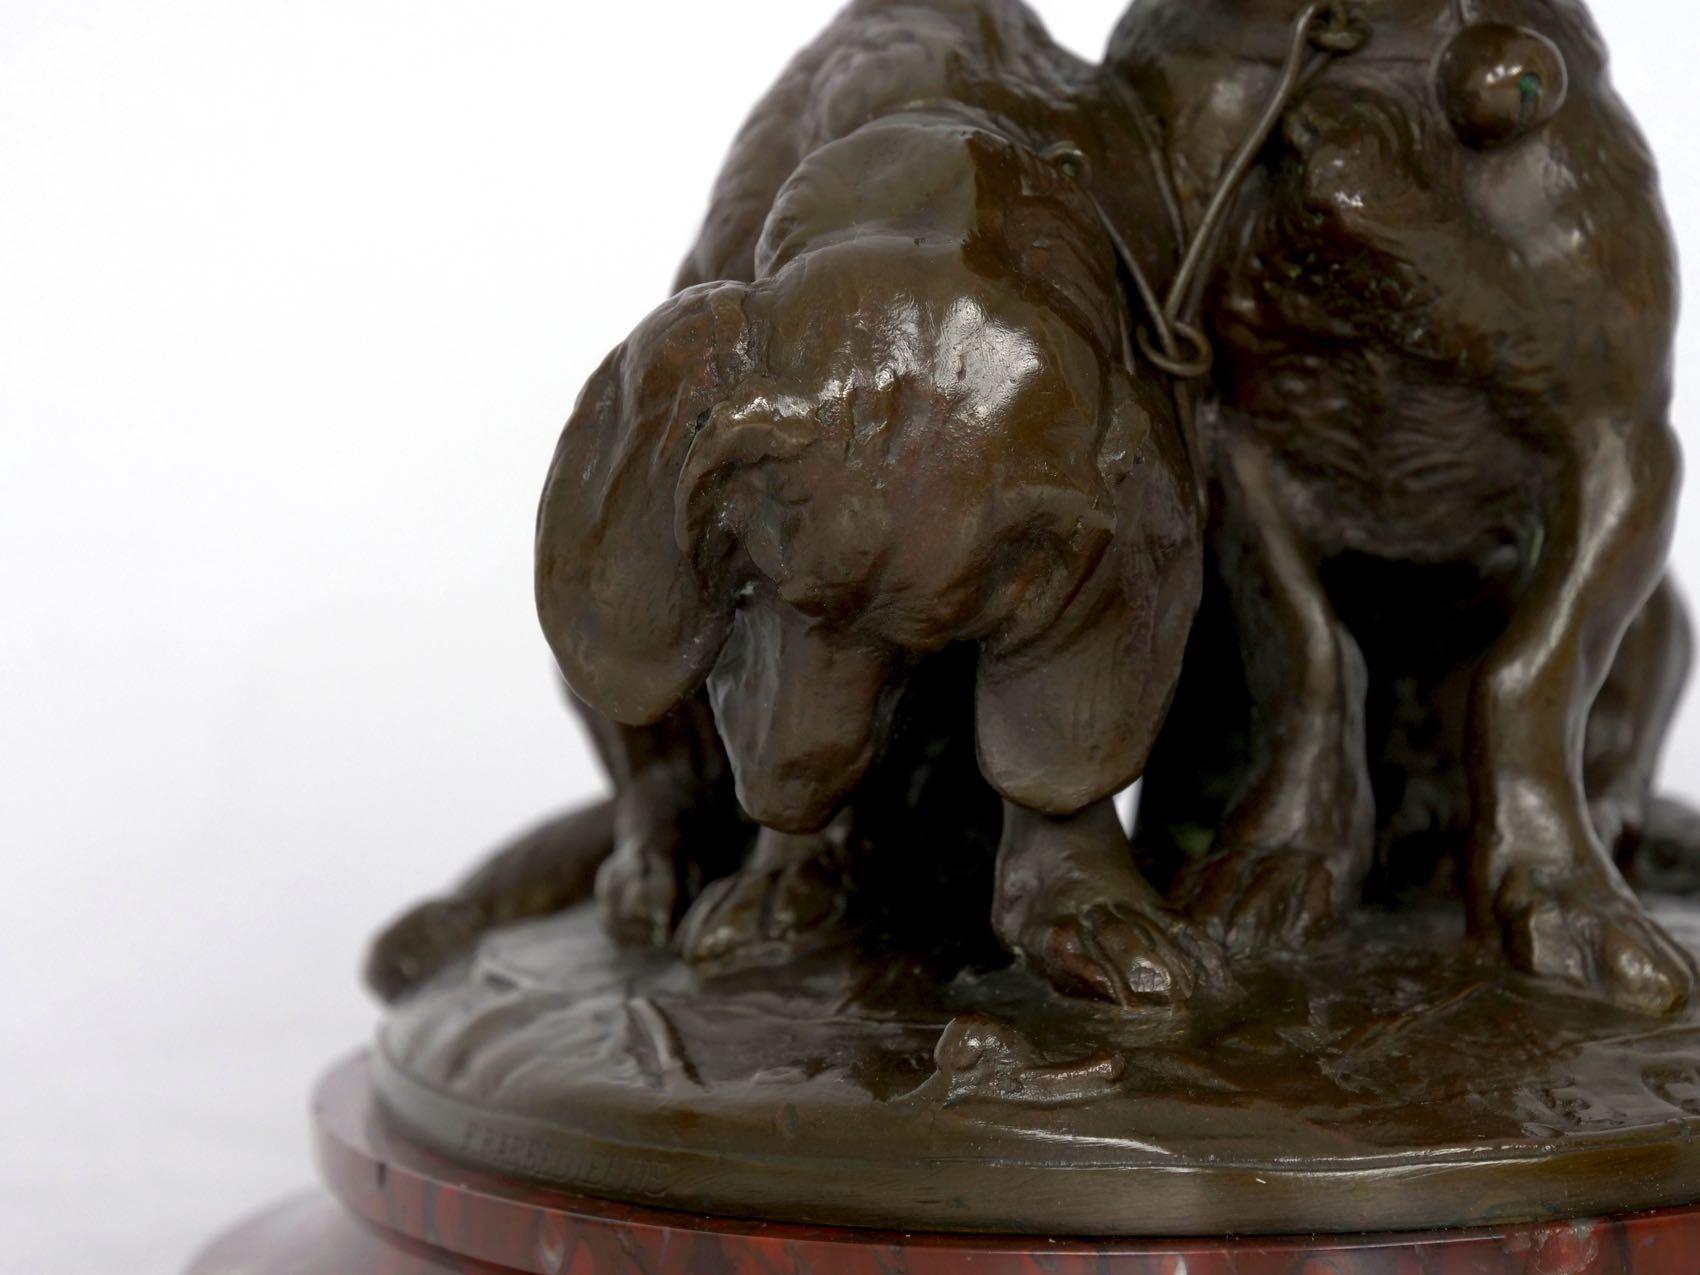 19th Century French Antique Bronze Sculpture of Basset Hounds by E. Fremiet & Barbedienne